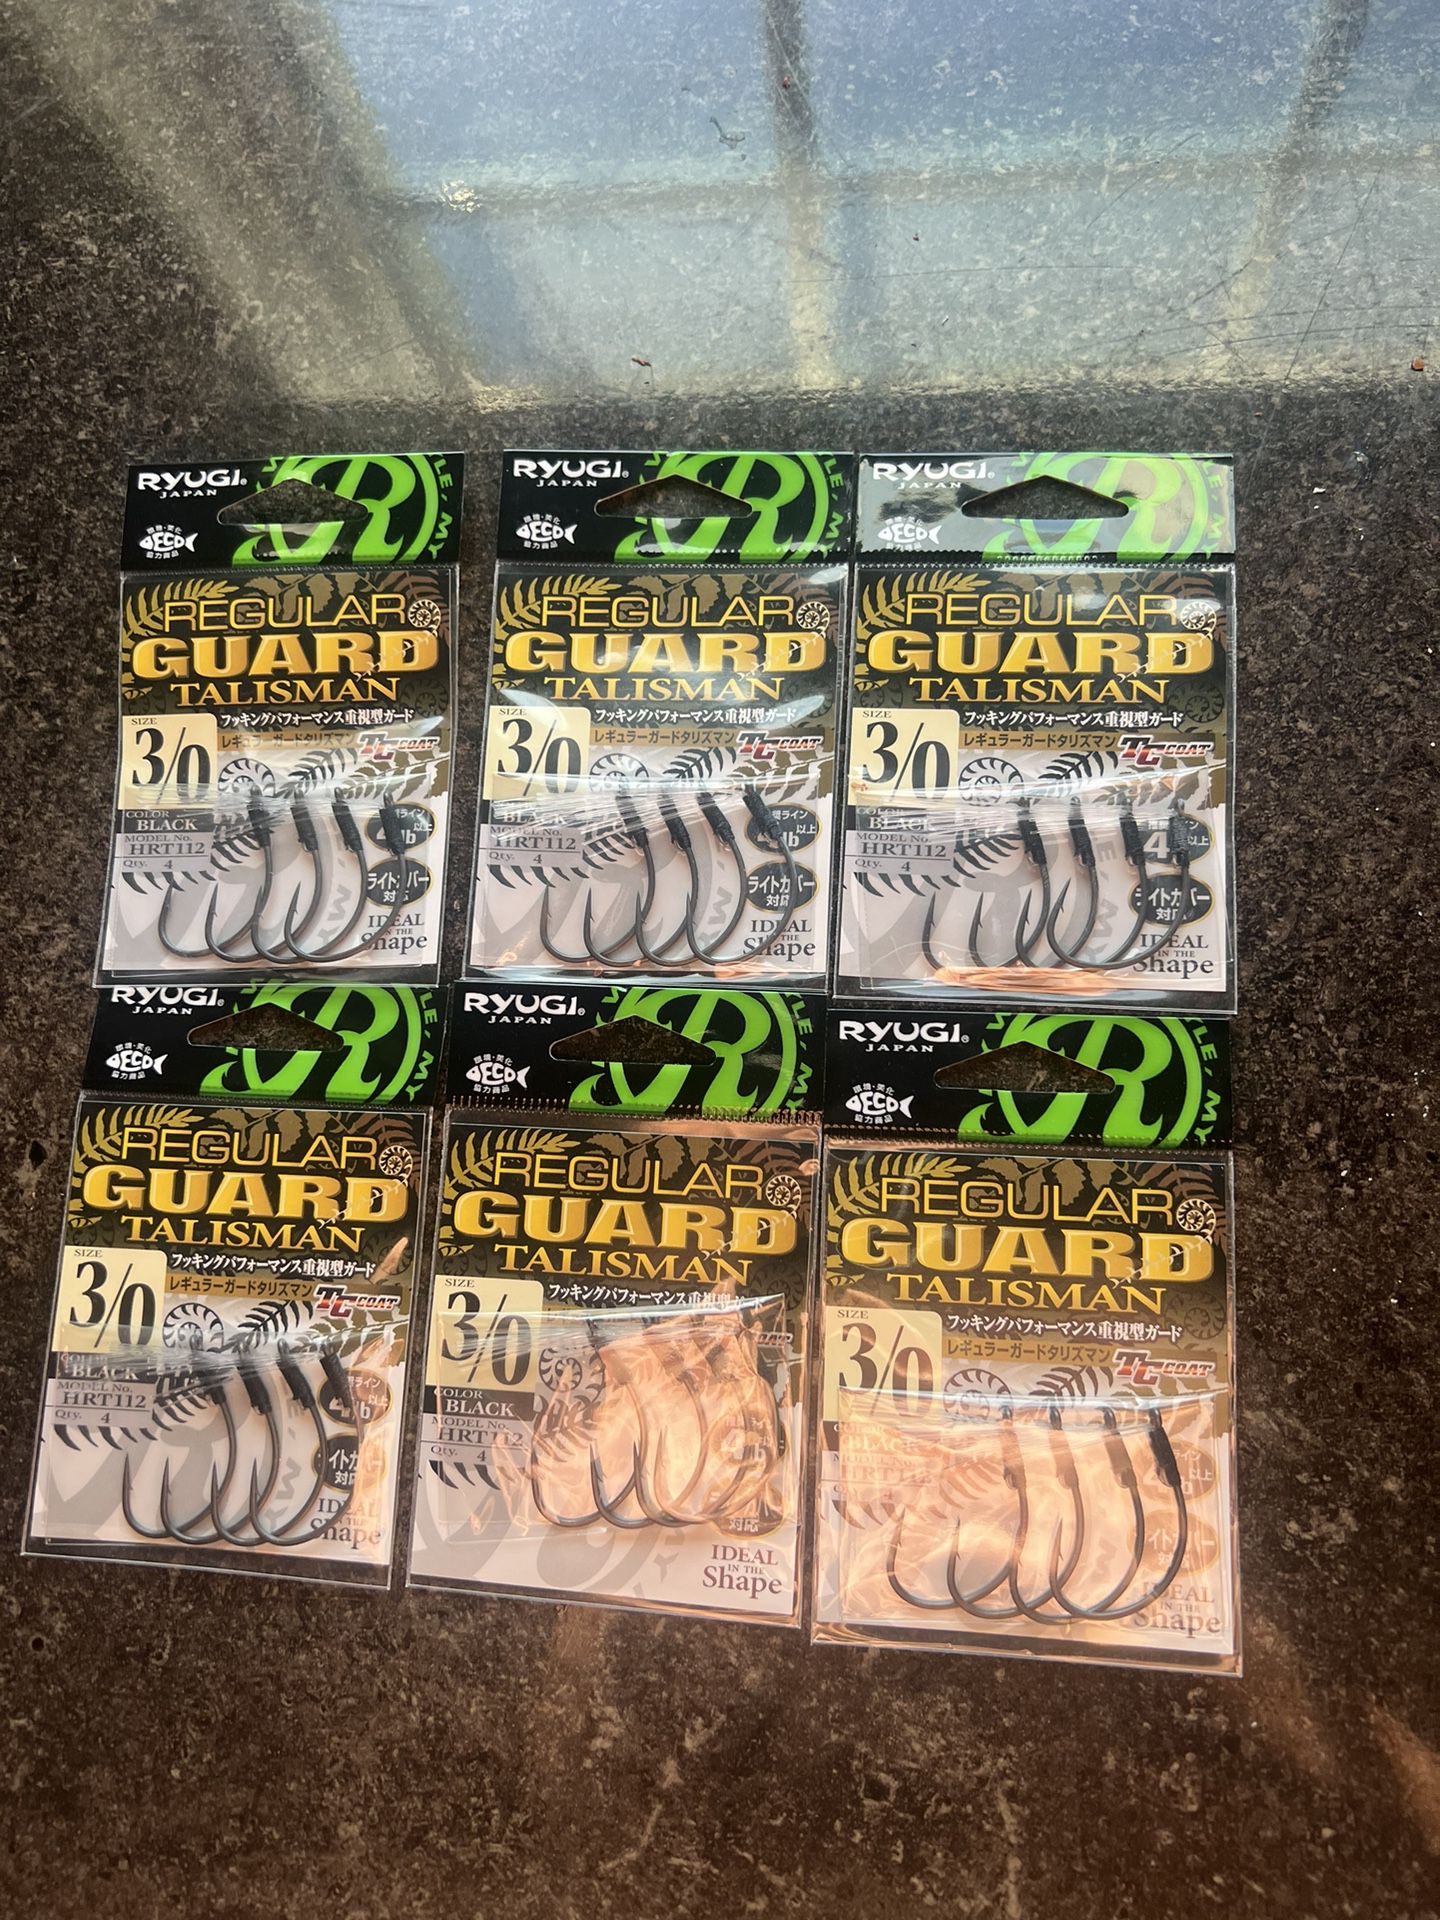 Weed less 3/0 New 24 Count Bass Fishing Hooks